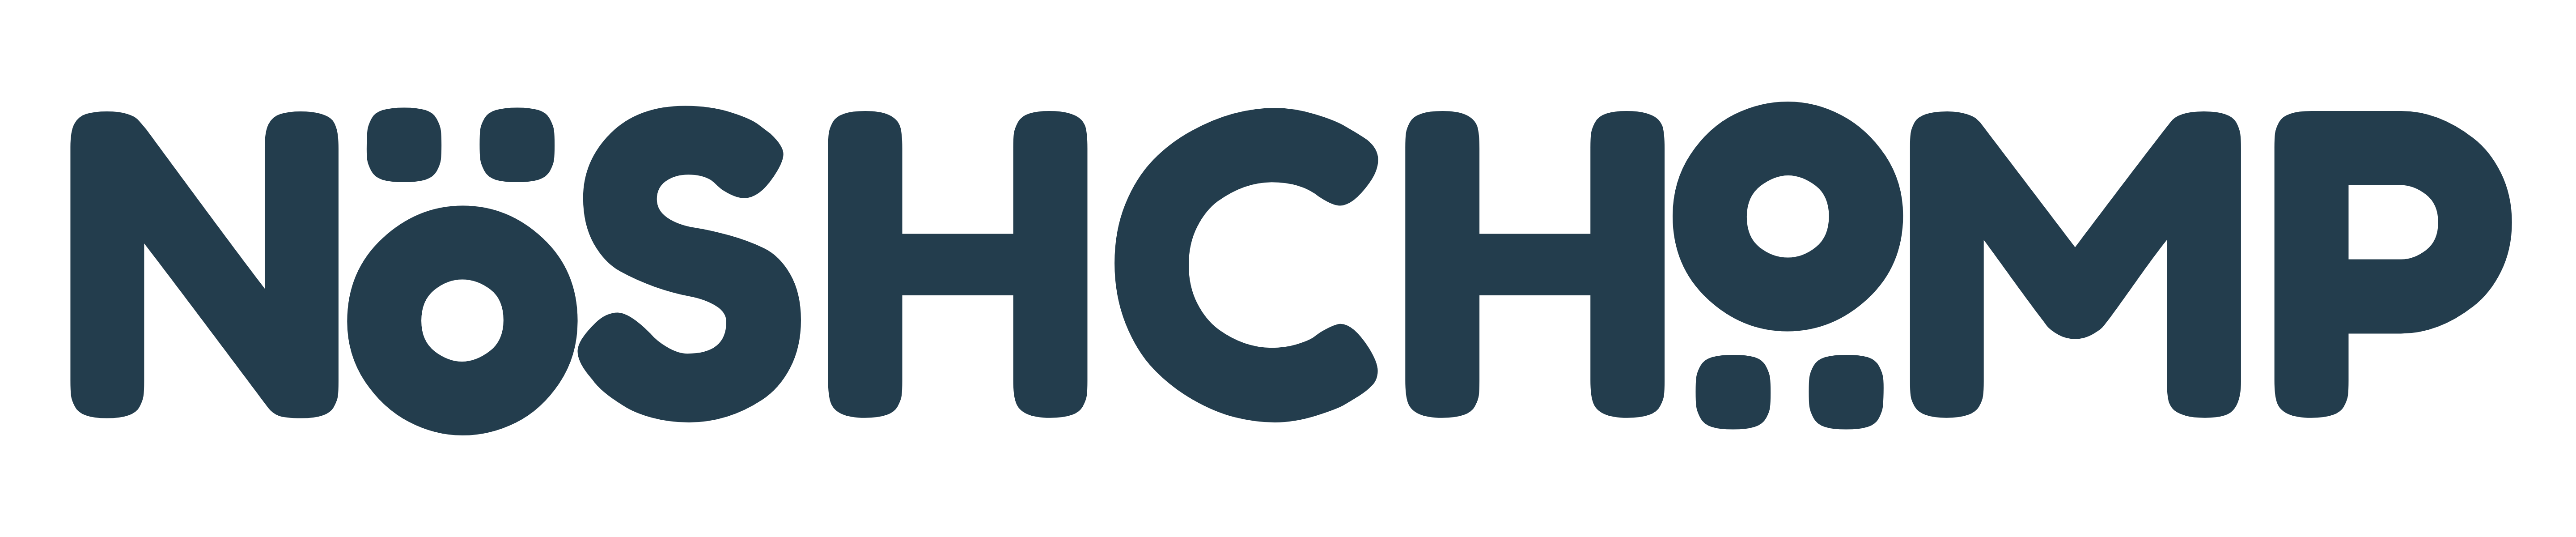 Logo of Noshchomp featuring stylized lettering in a deep blue hue, emphasizing a modern and holistic brand identity.